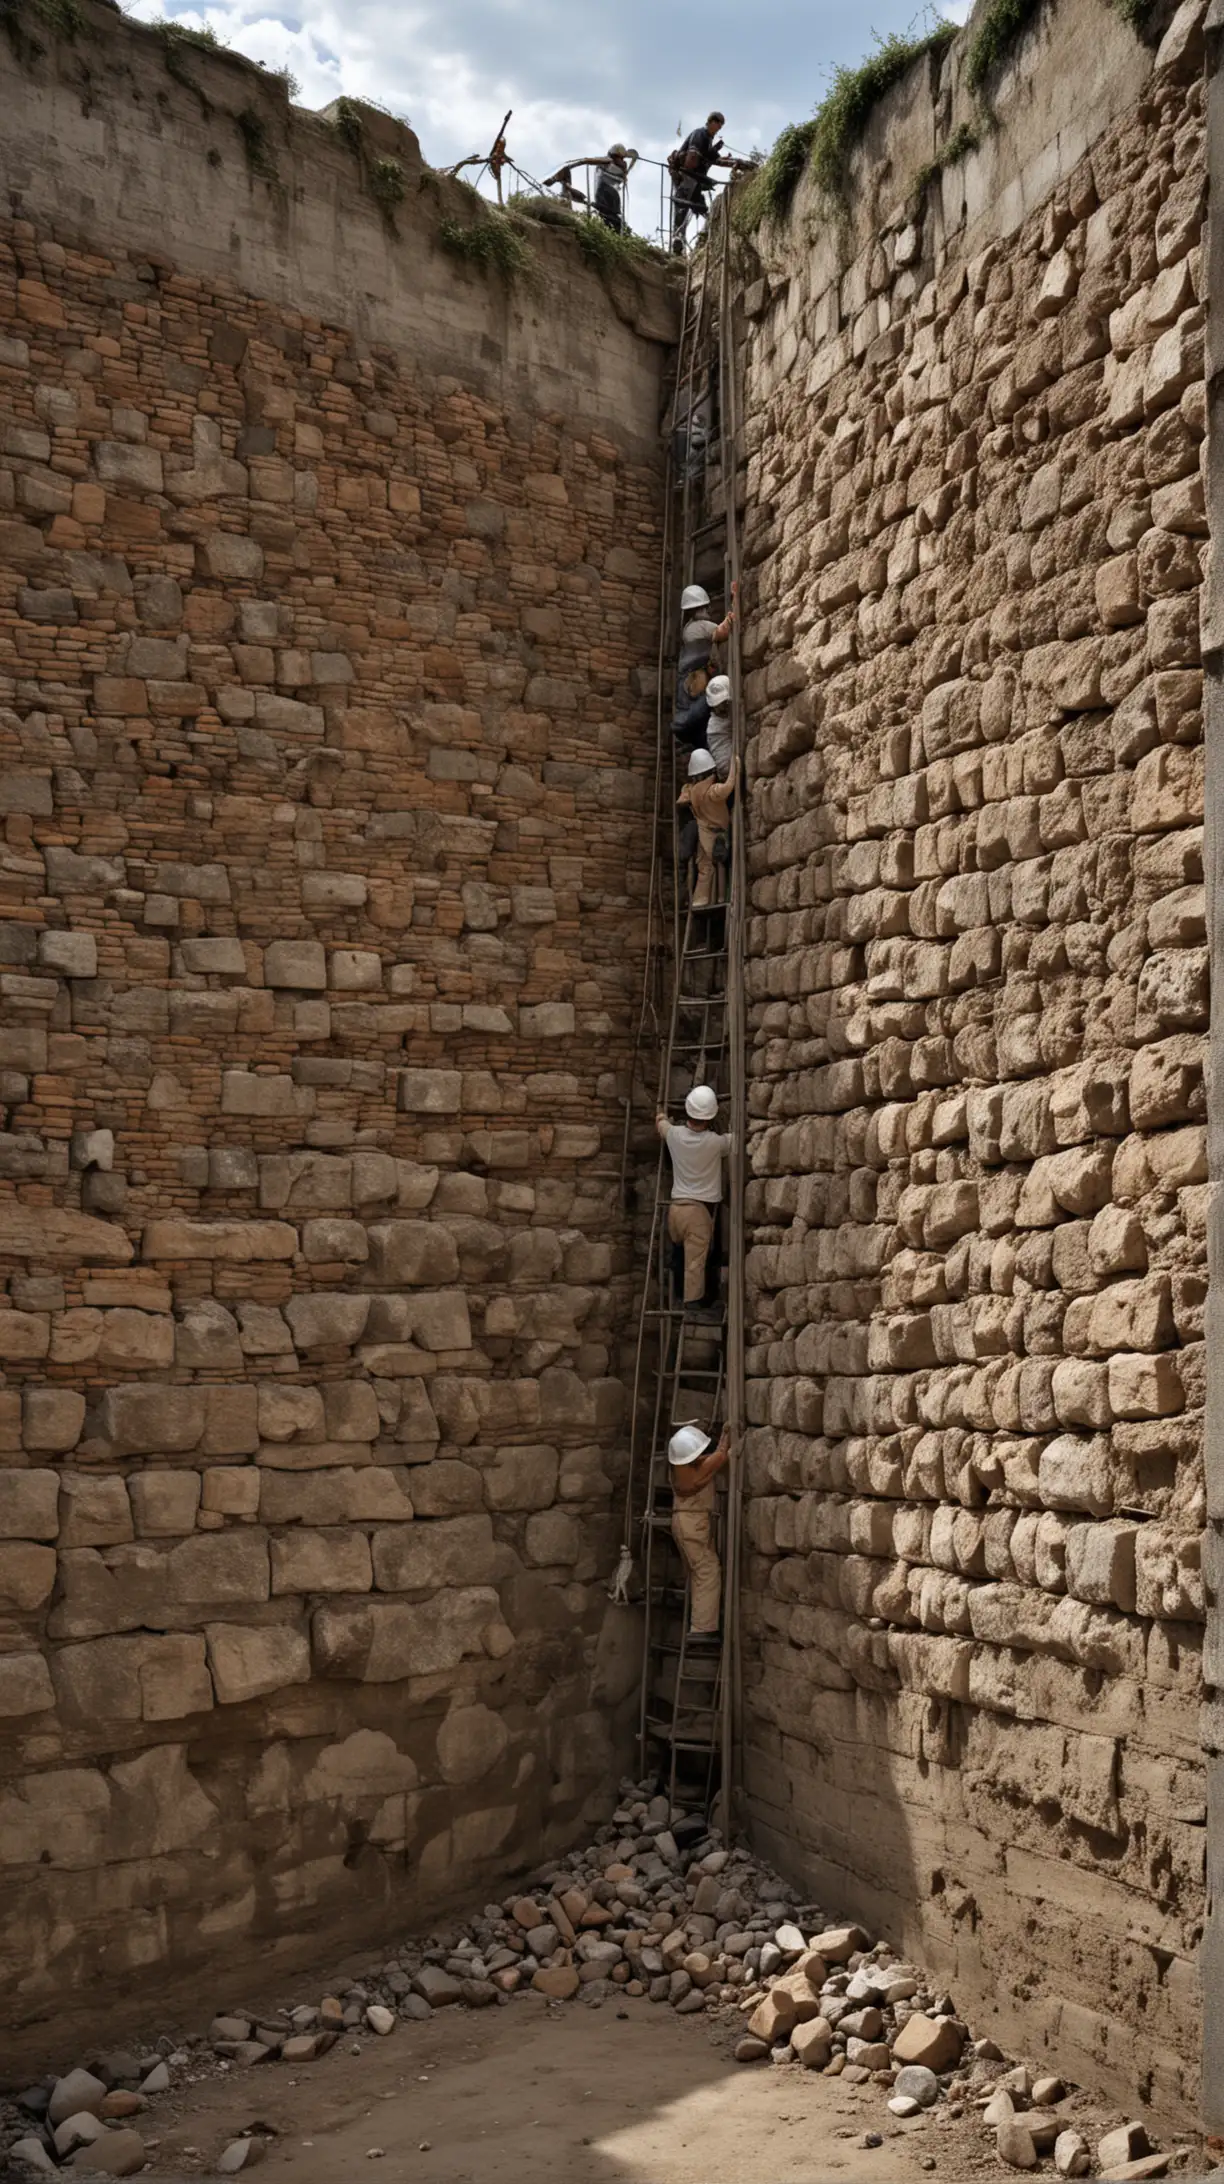 Hyper Realistic Depiction of Ancient Wall Construction Workers